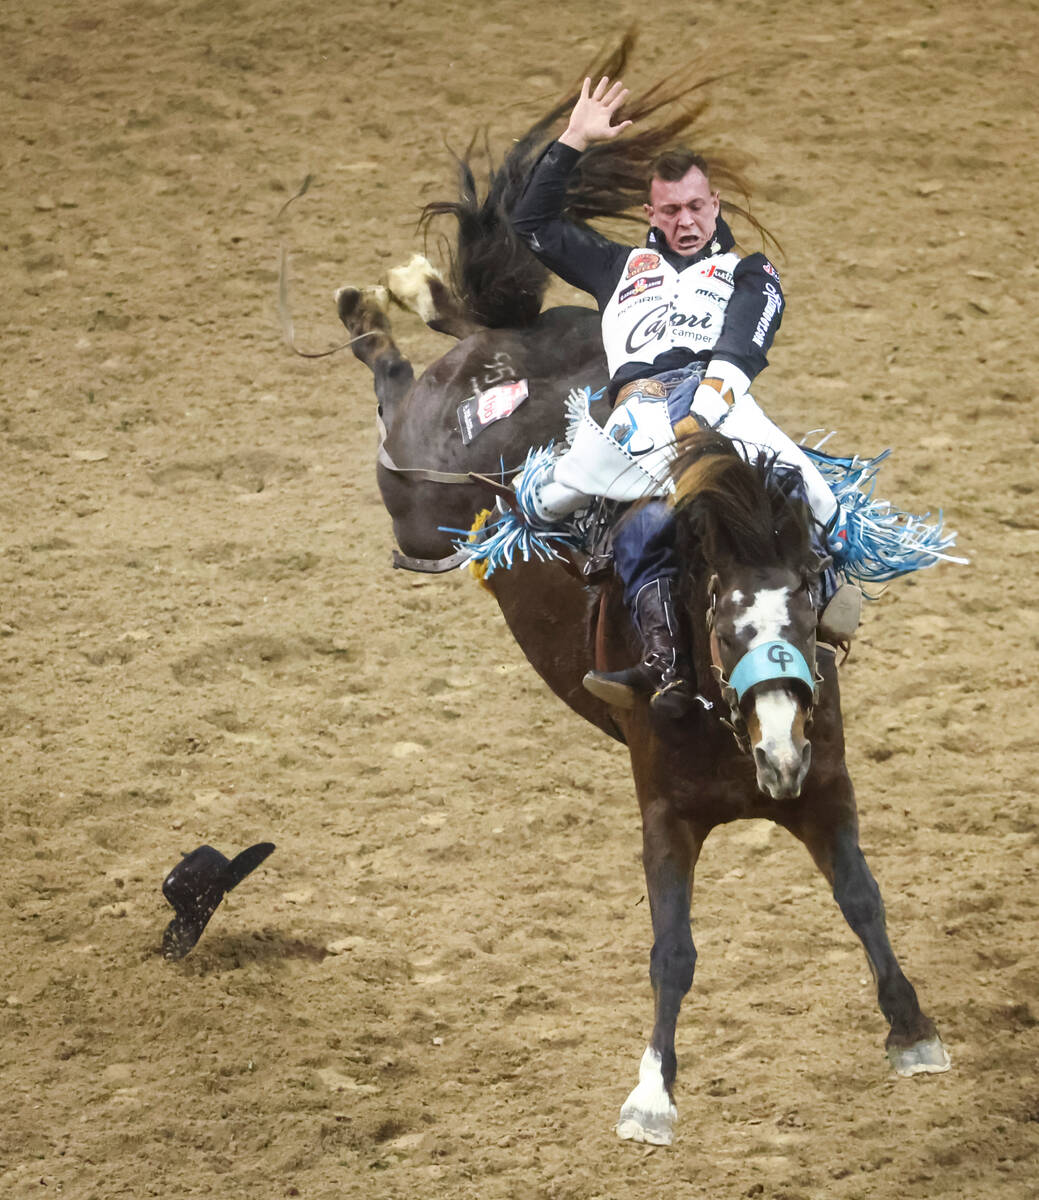 Tim O’Connell, of Zwingle, Iowa, competes in bareback riding during the first night of the Na ...